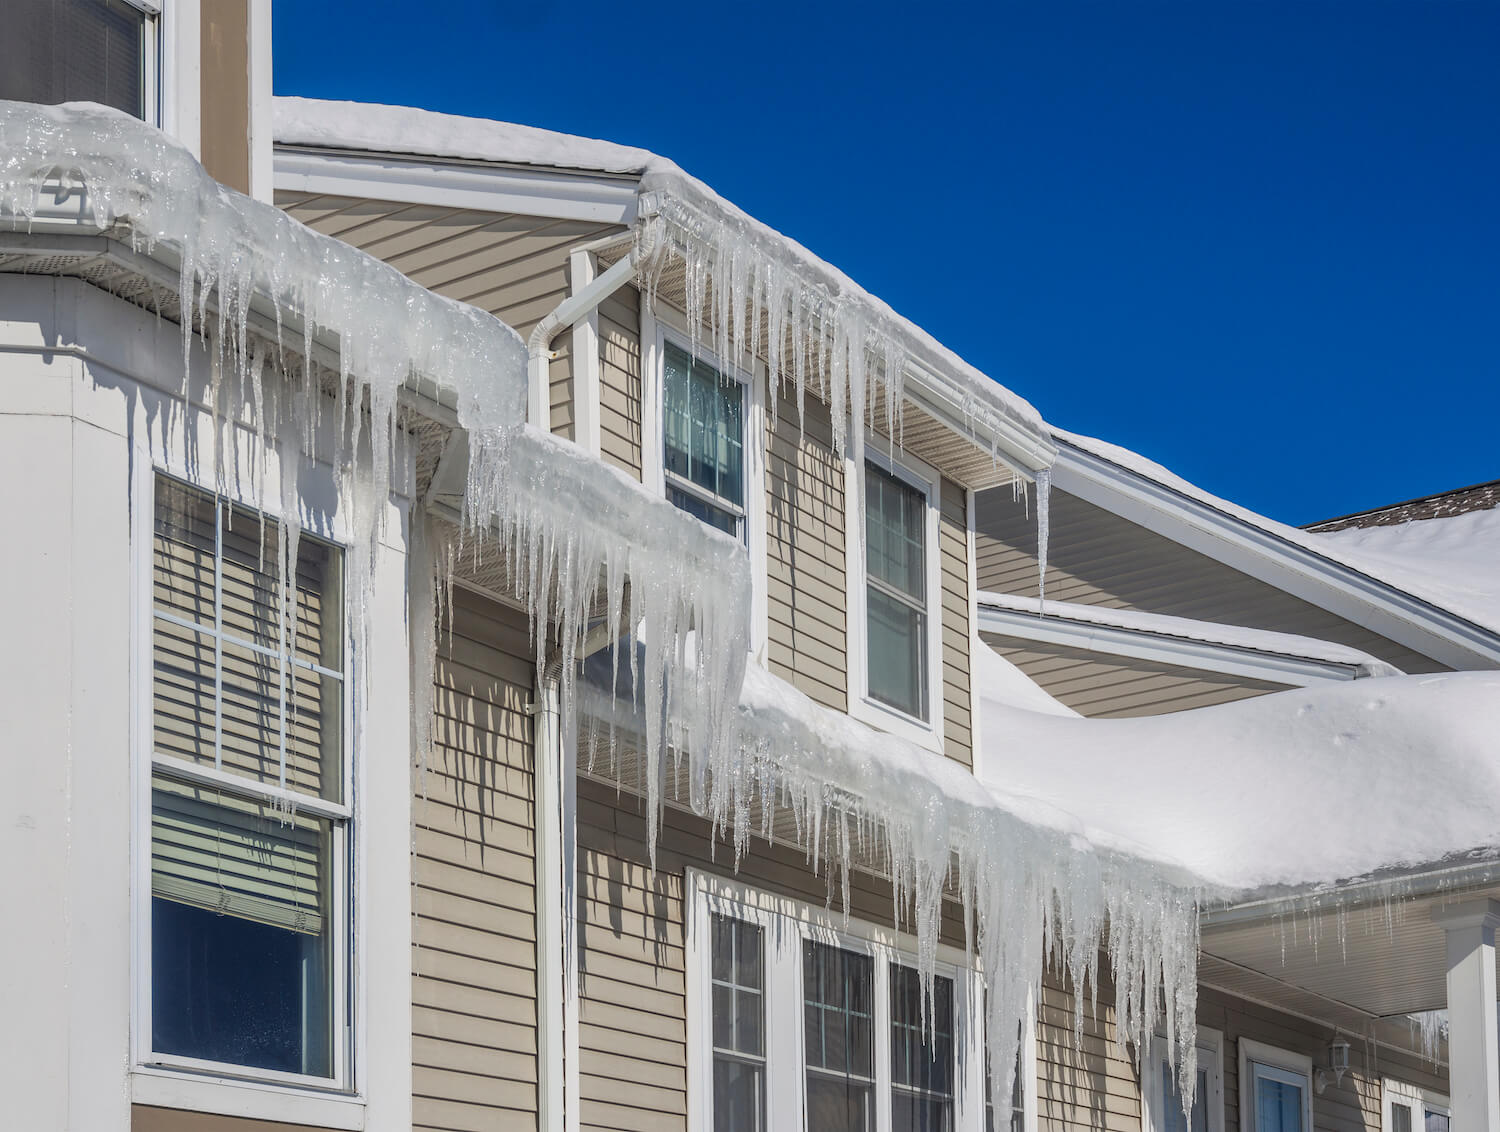 What Is The Best Way To Prevent Ice Dams